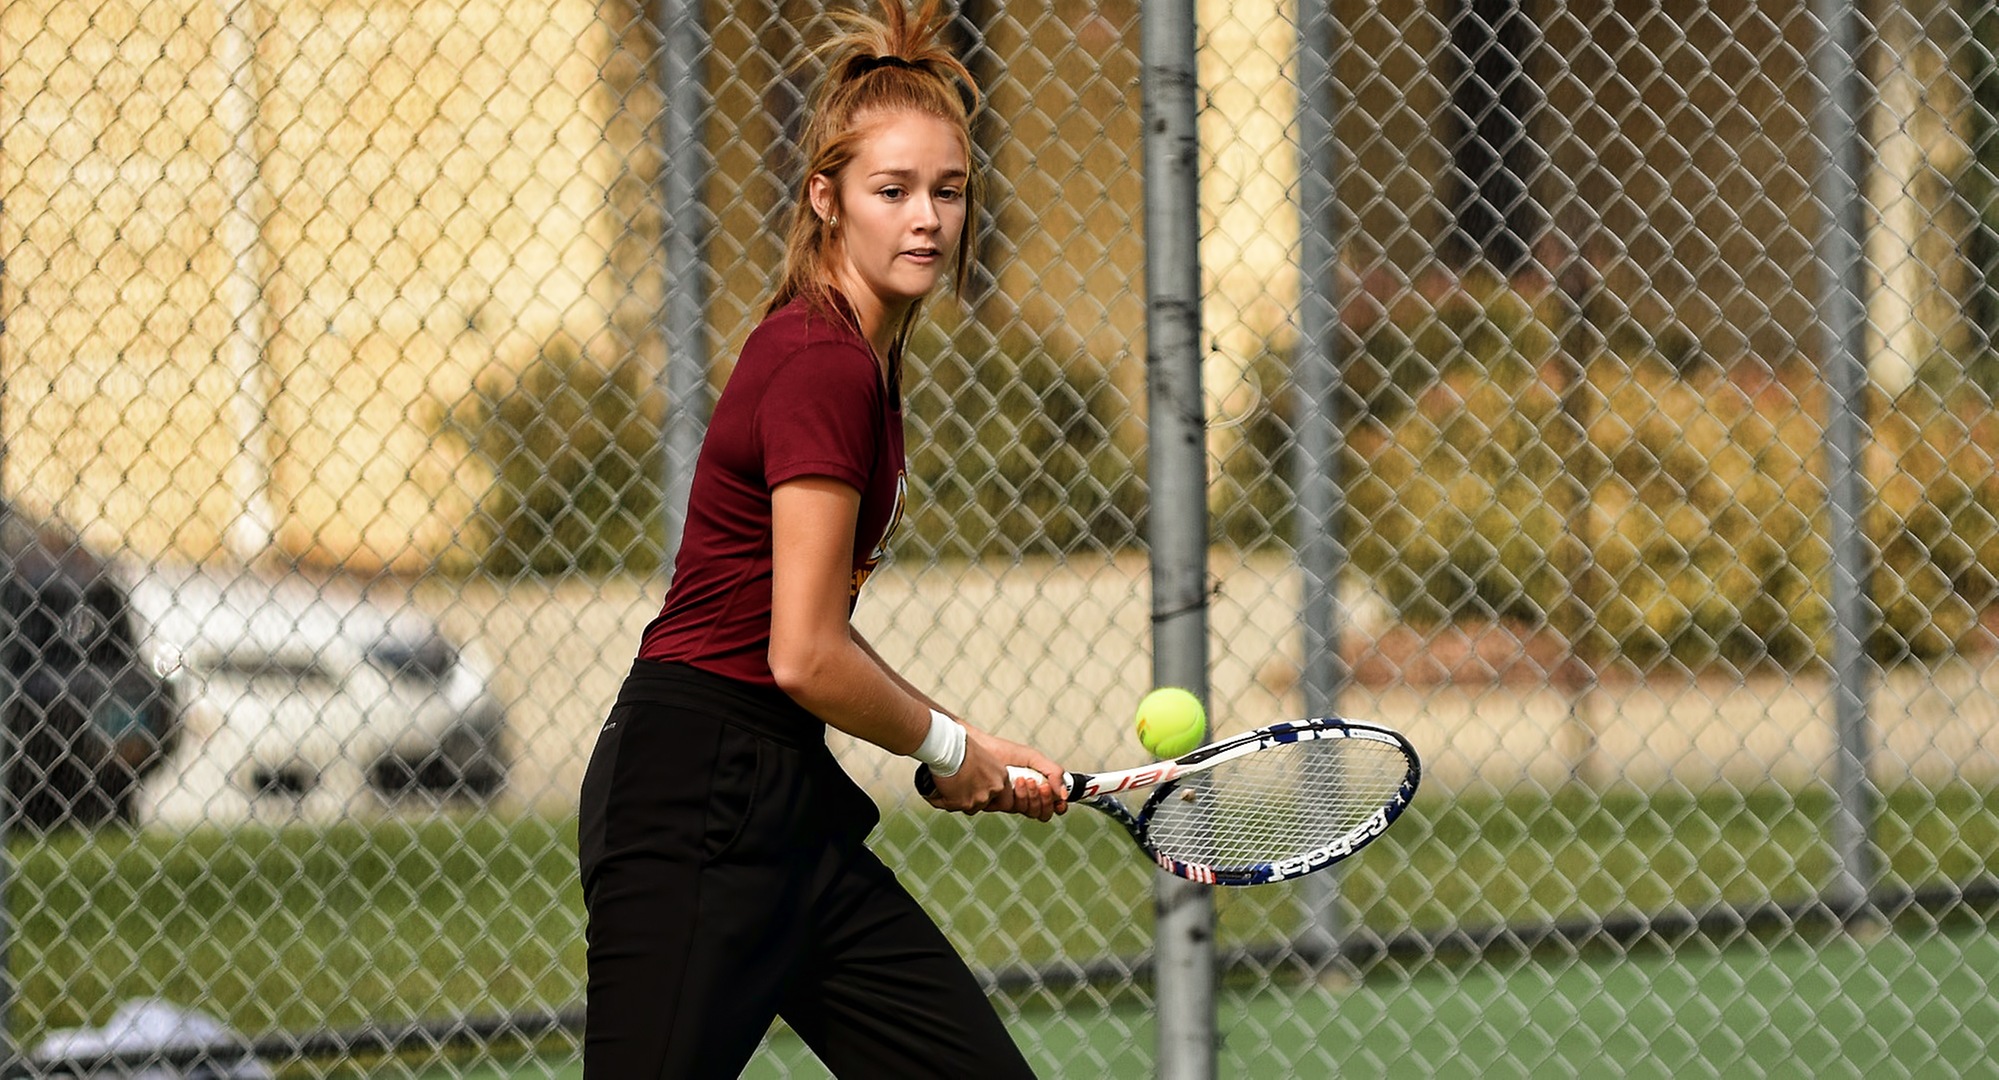 Freshman Raquel Egge fought off seven match points and earned an epic super-set tie-breaker win at No.1 singles against a 2-time All-MIAC player in the Cobbers' MIAC opener at St. Thomas.